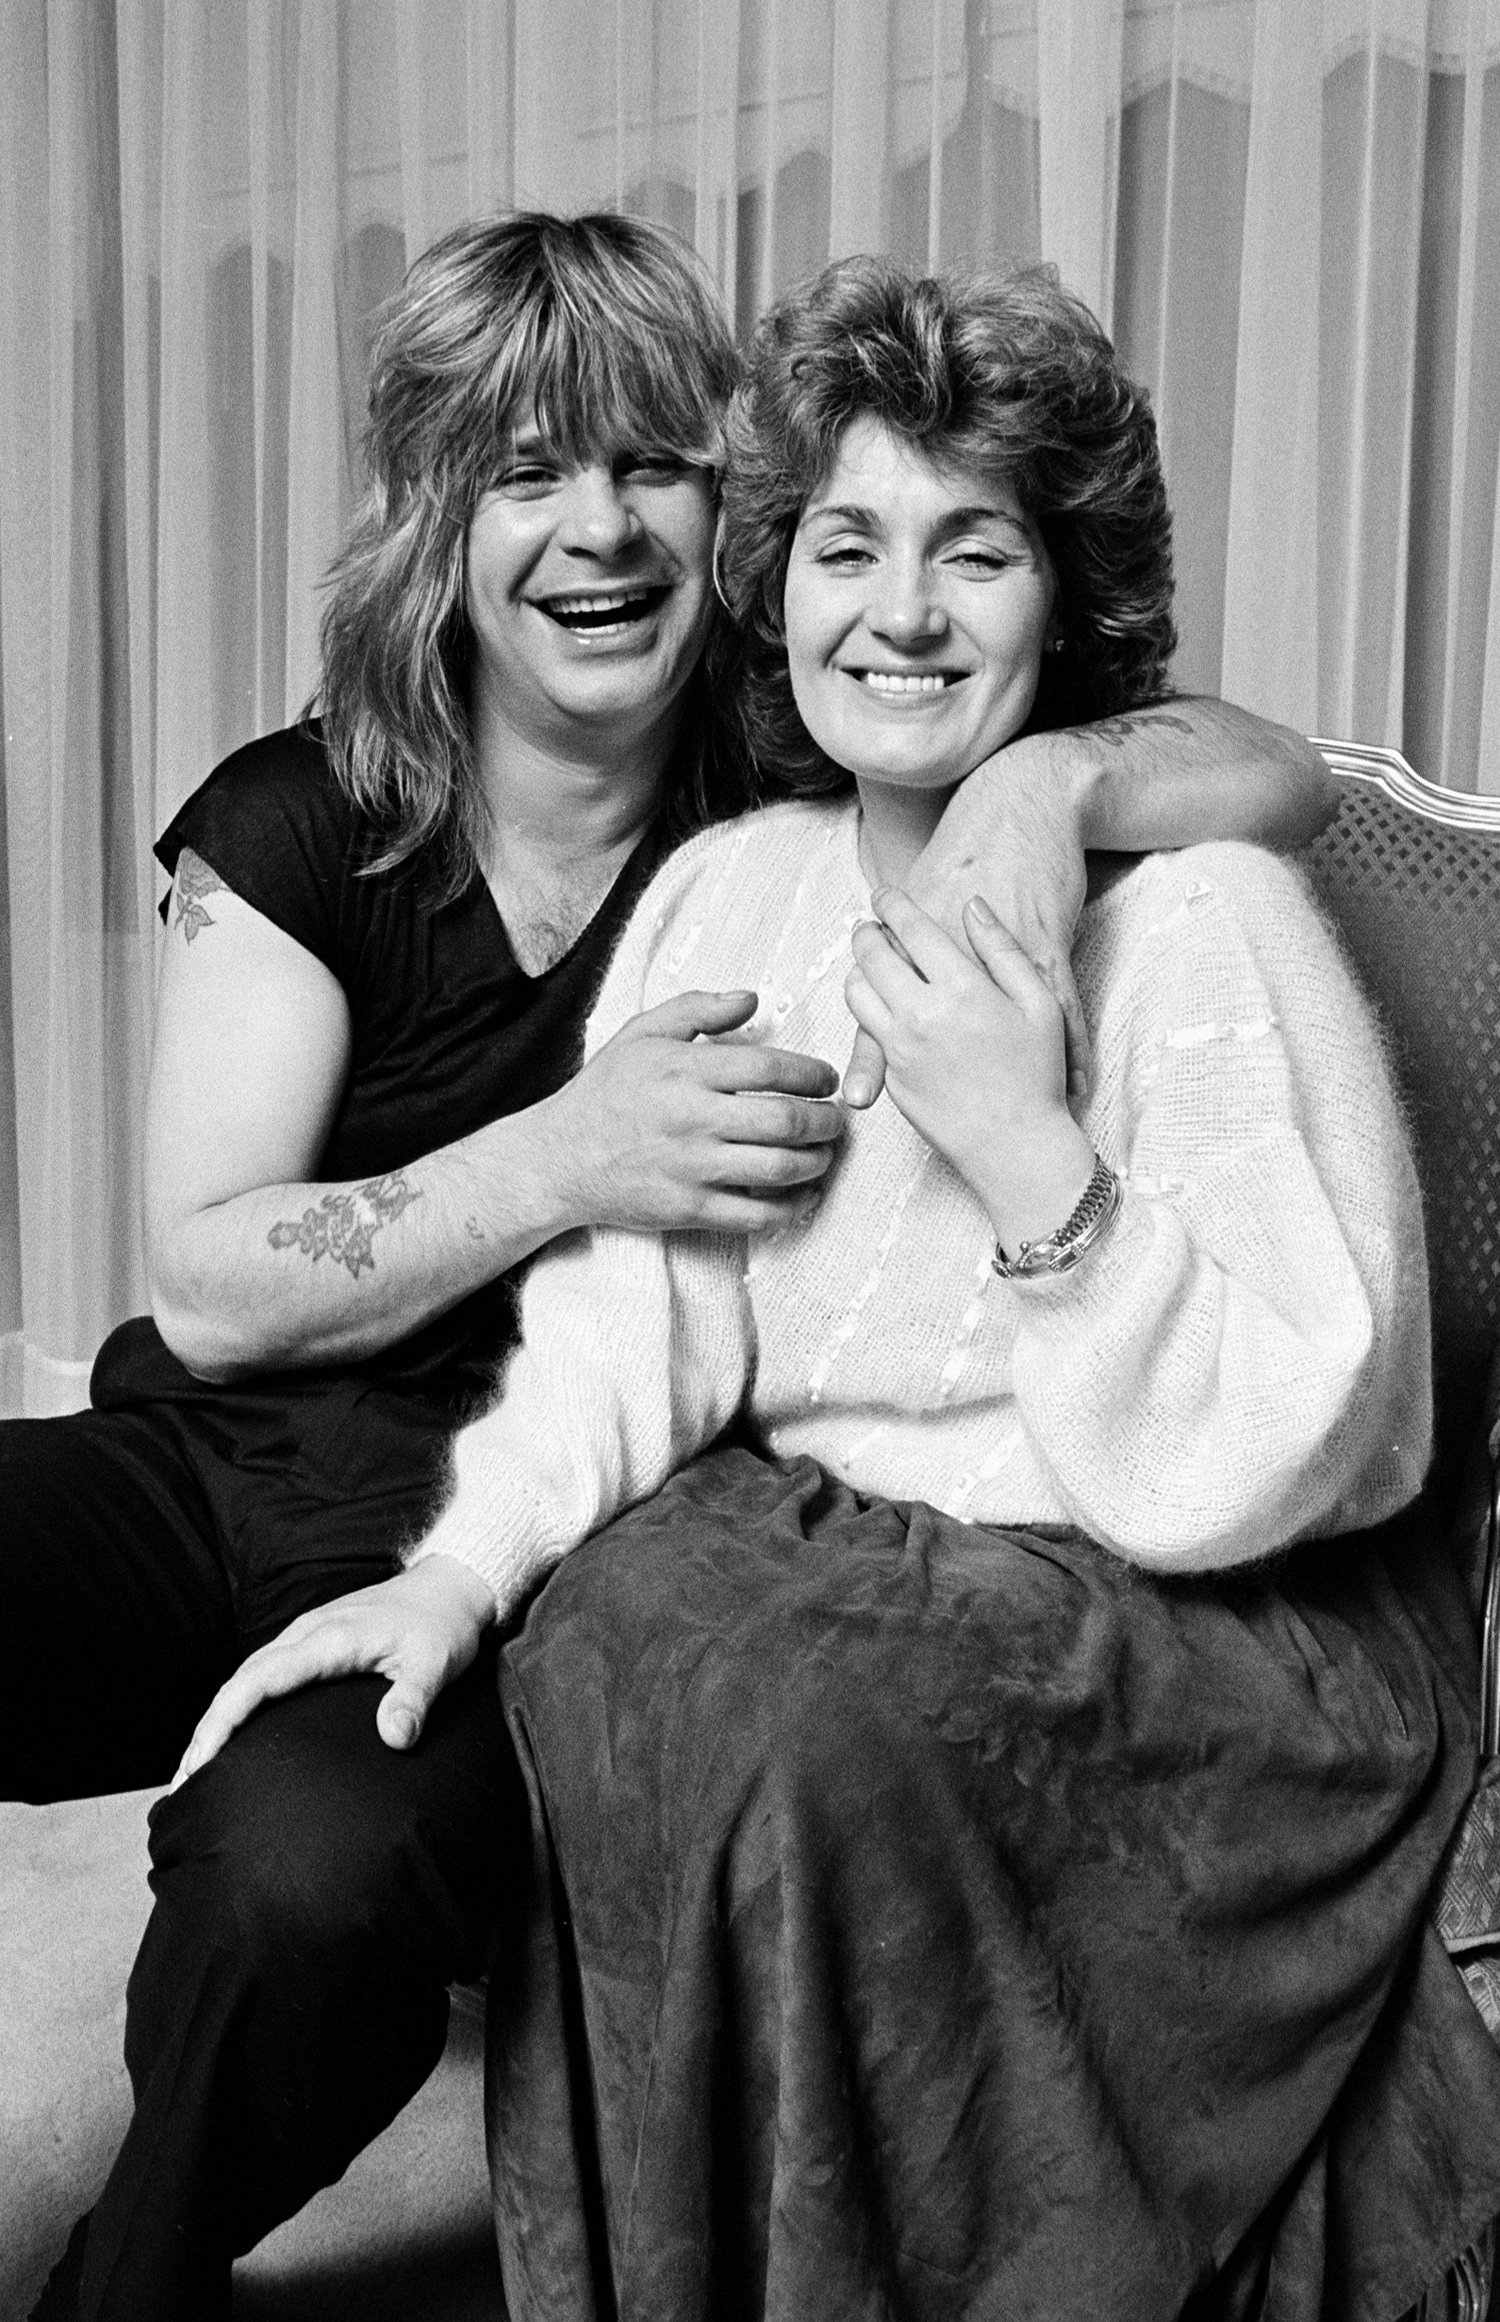 Singer-songwriter Ozzy Osbourne pictured with his wife, music manager Sharon Osbourne. / Source: Getty Images